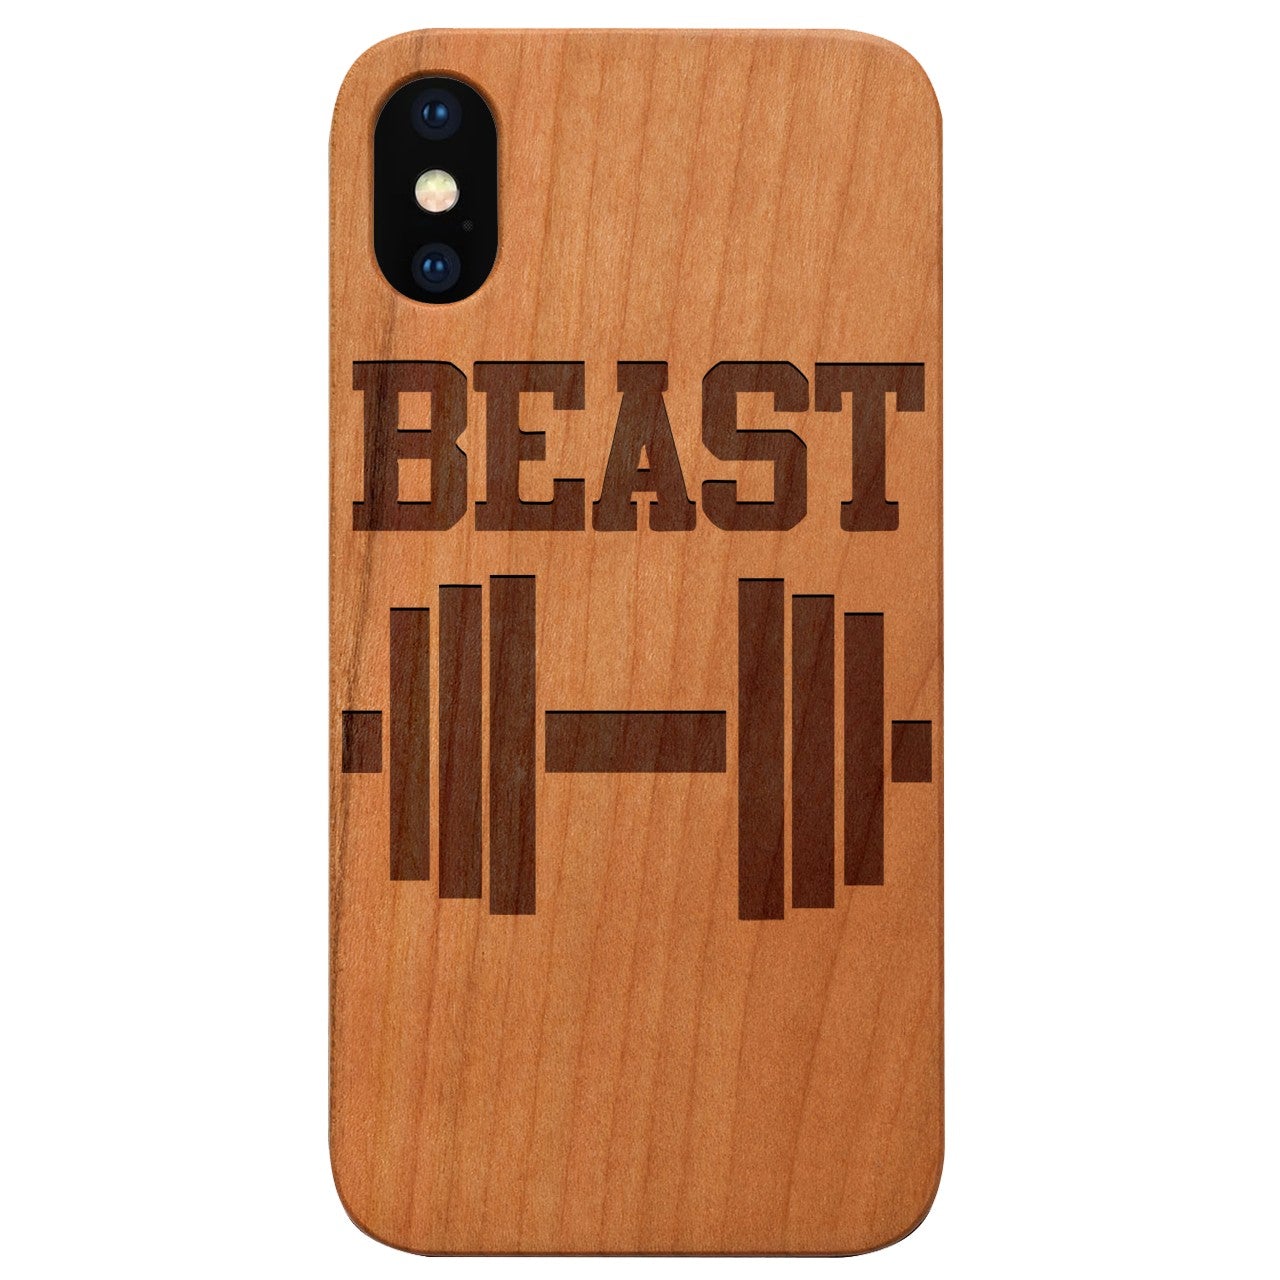  Beast - Engraved - Wooden Phone Case - IPhone 13 Models